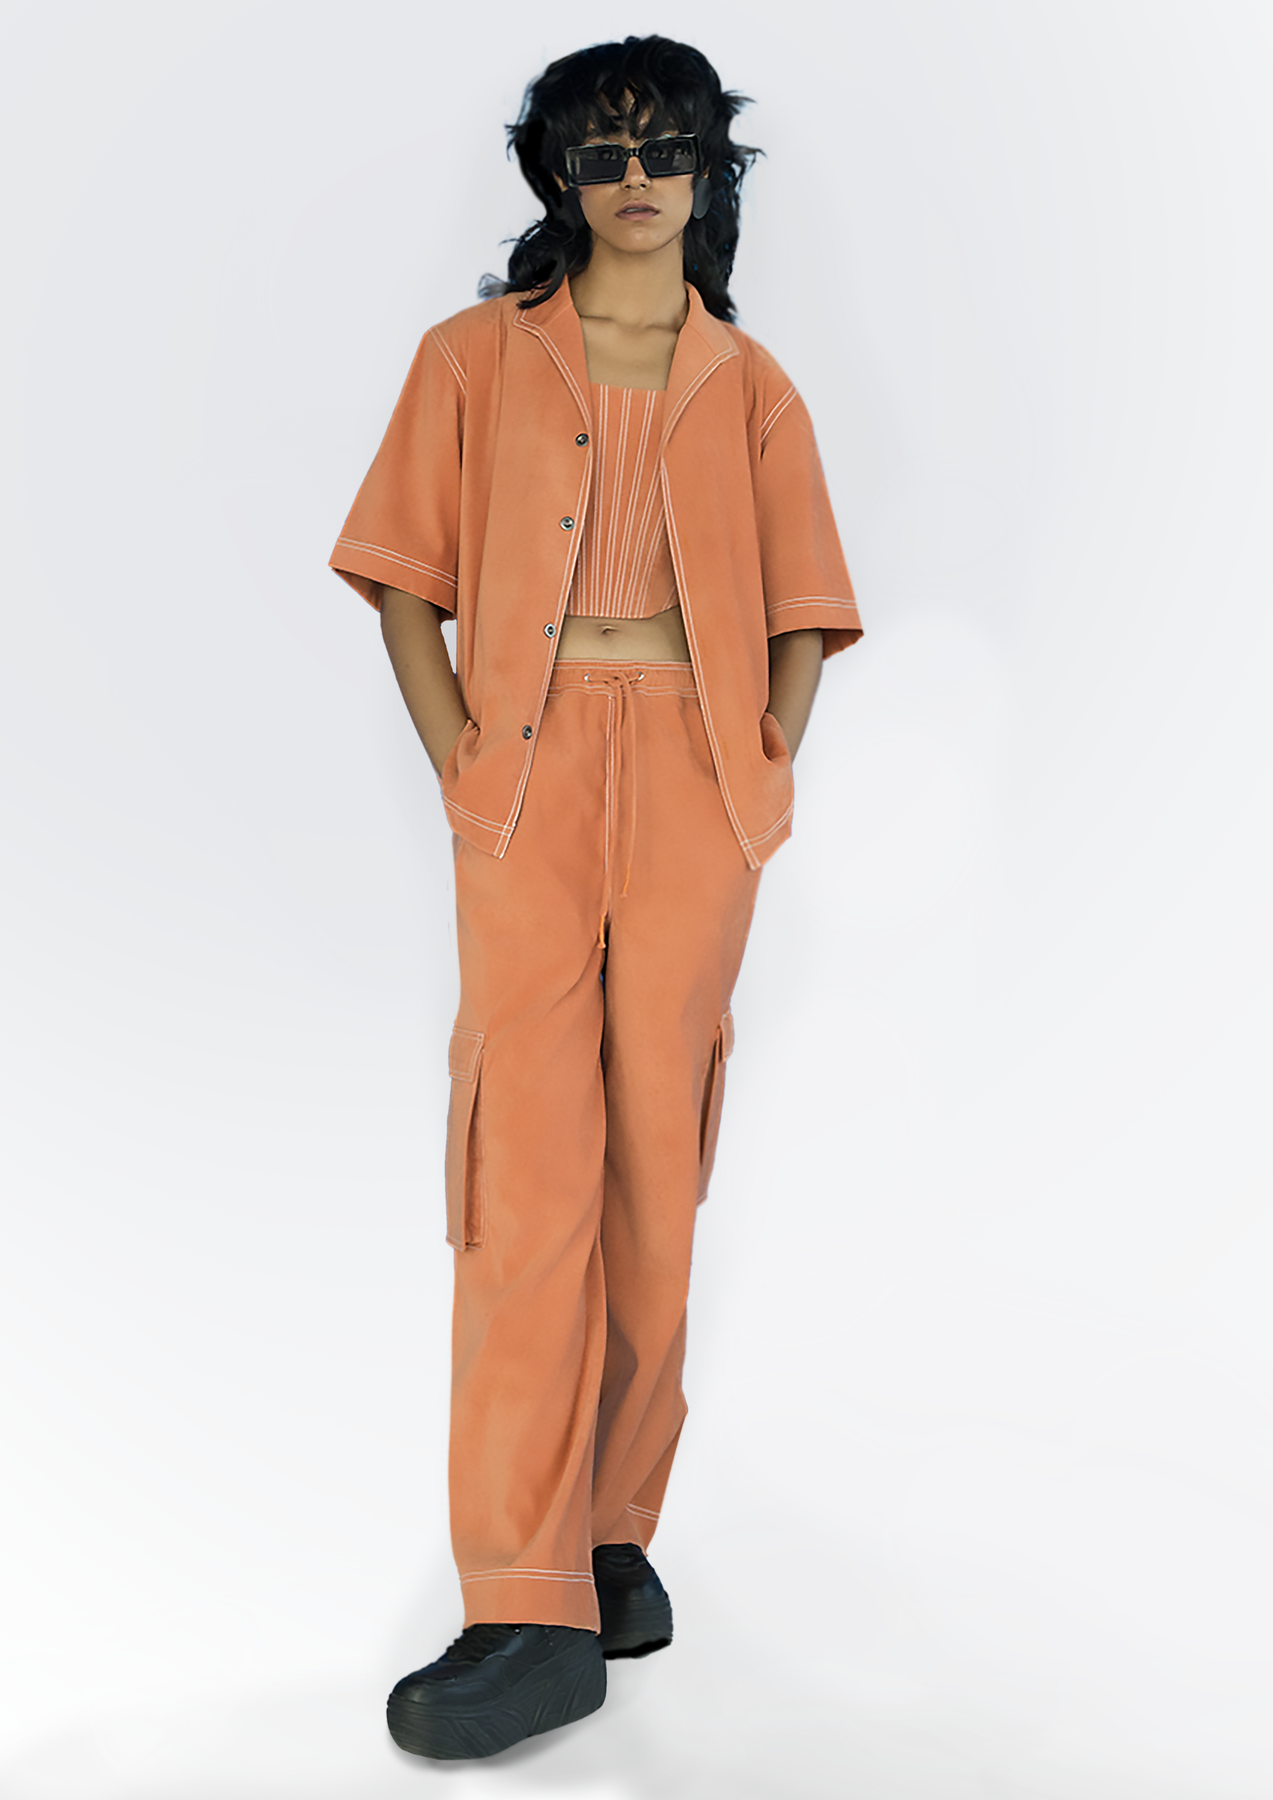 SANTRA CO-ORD, a product by Doh tak keh